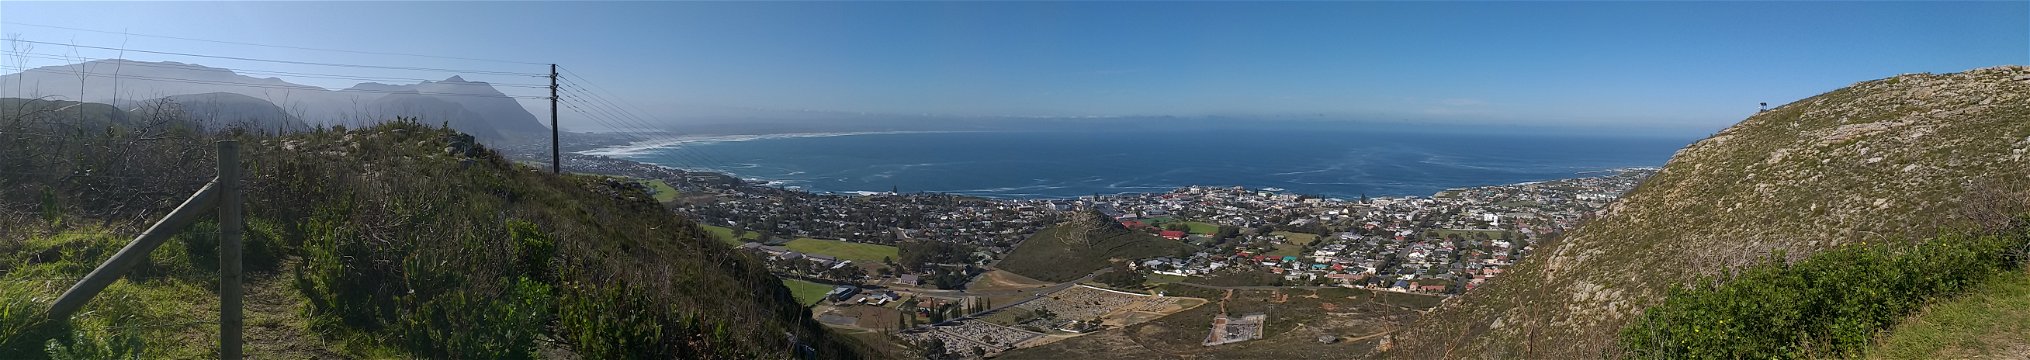 Hermanus from a distance